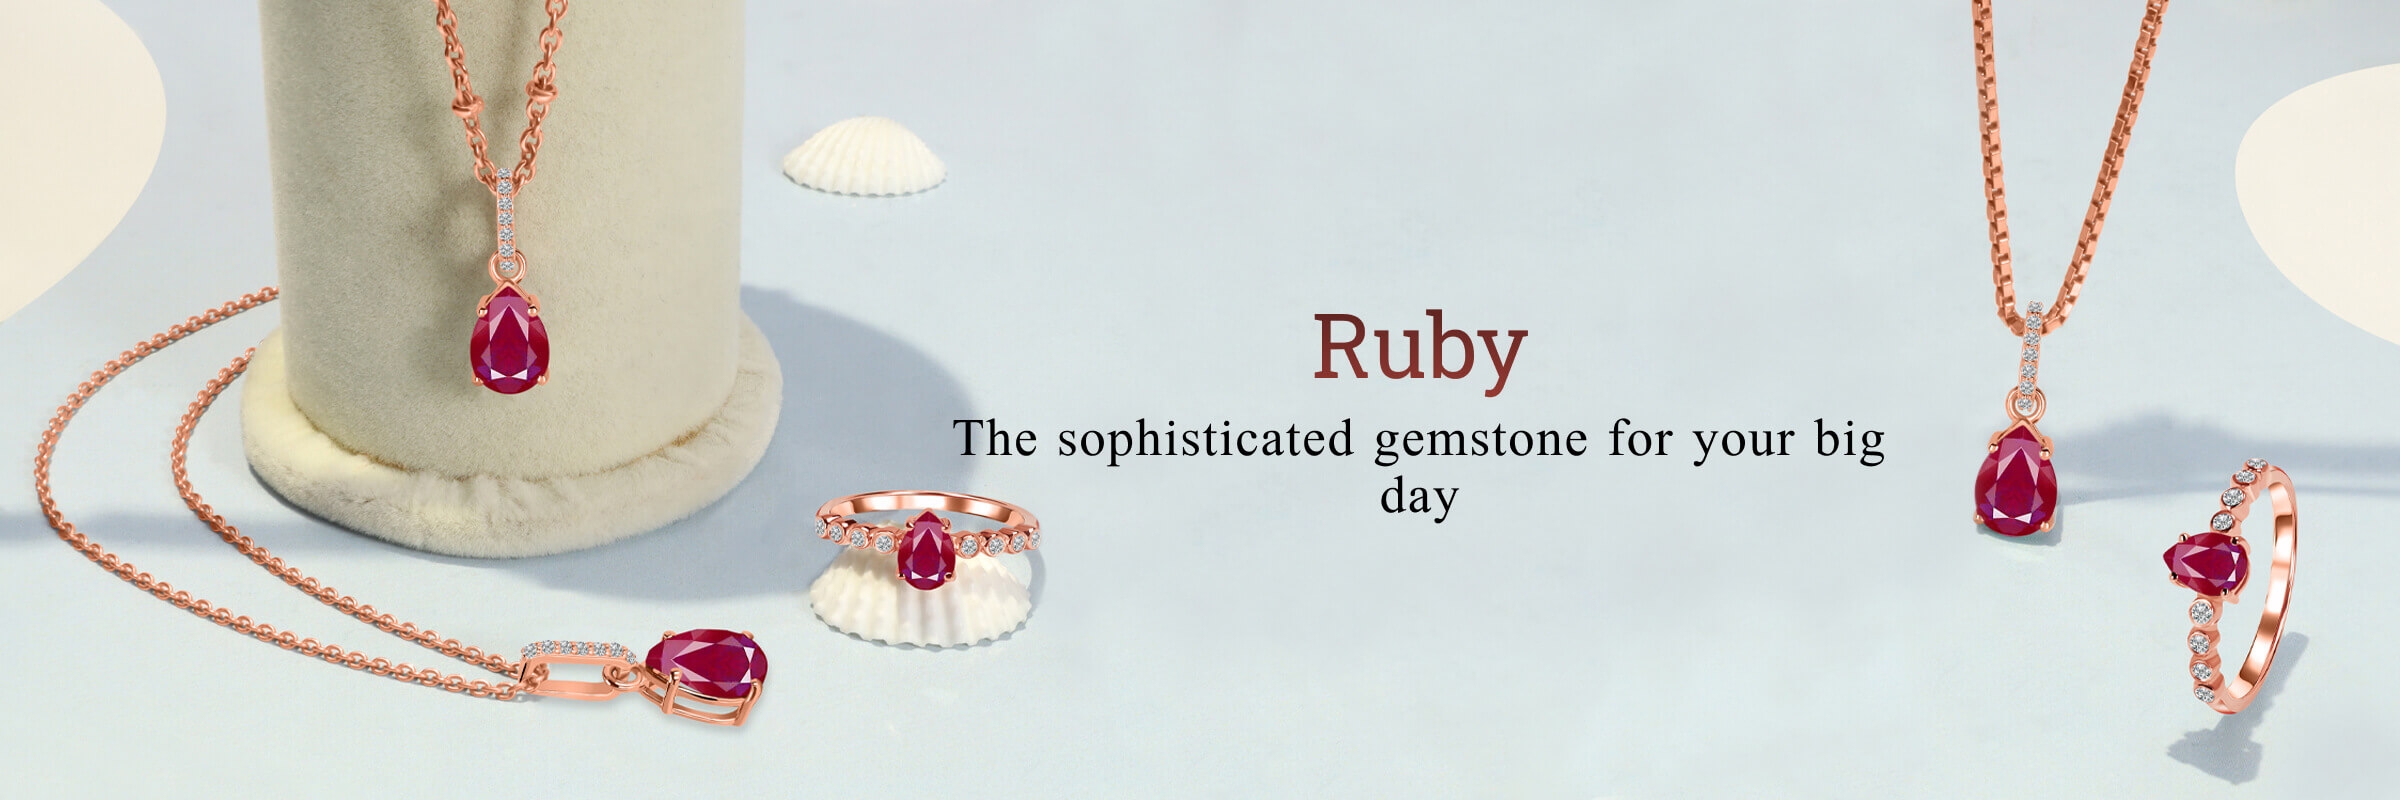 Ruby - The sophisticated gemstone for your big day!